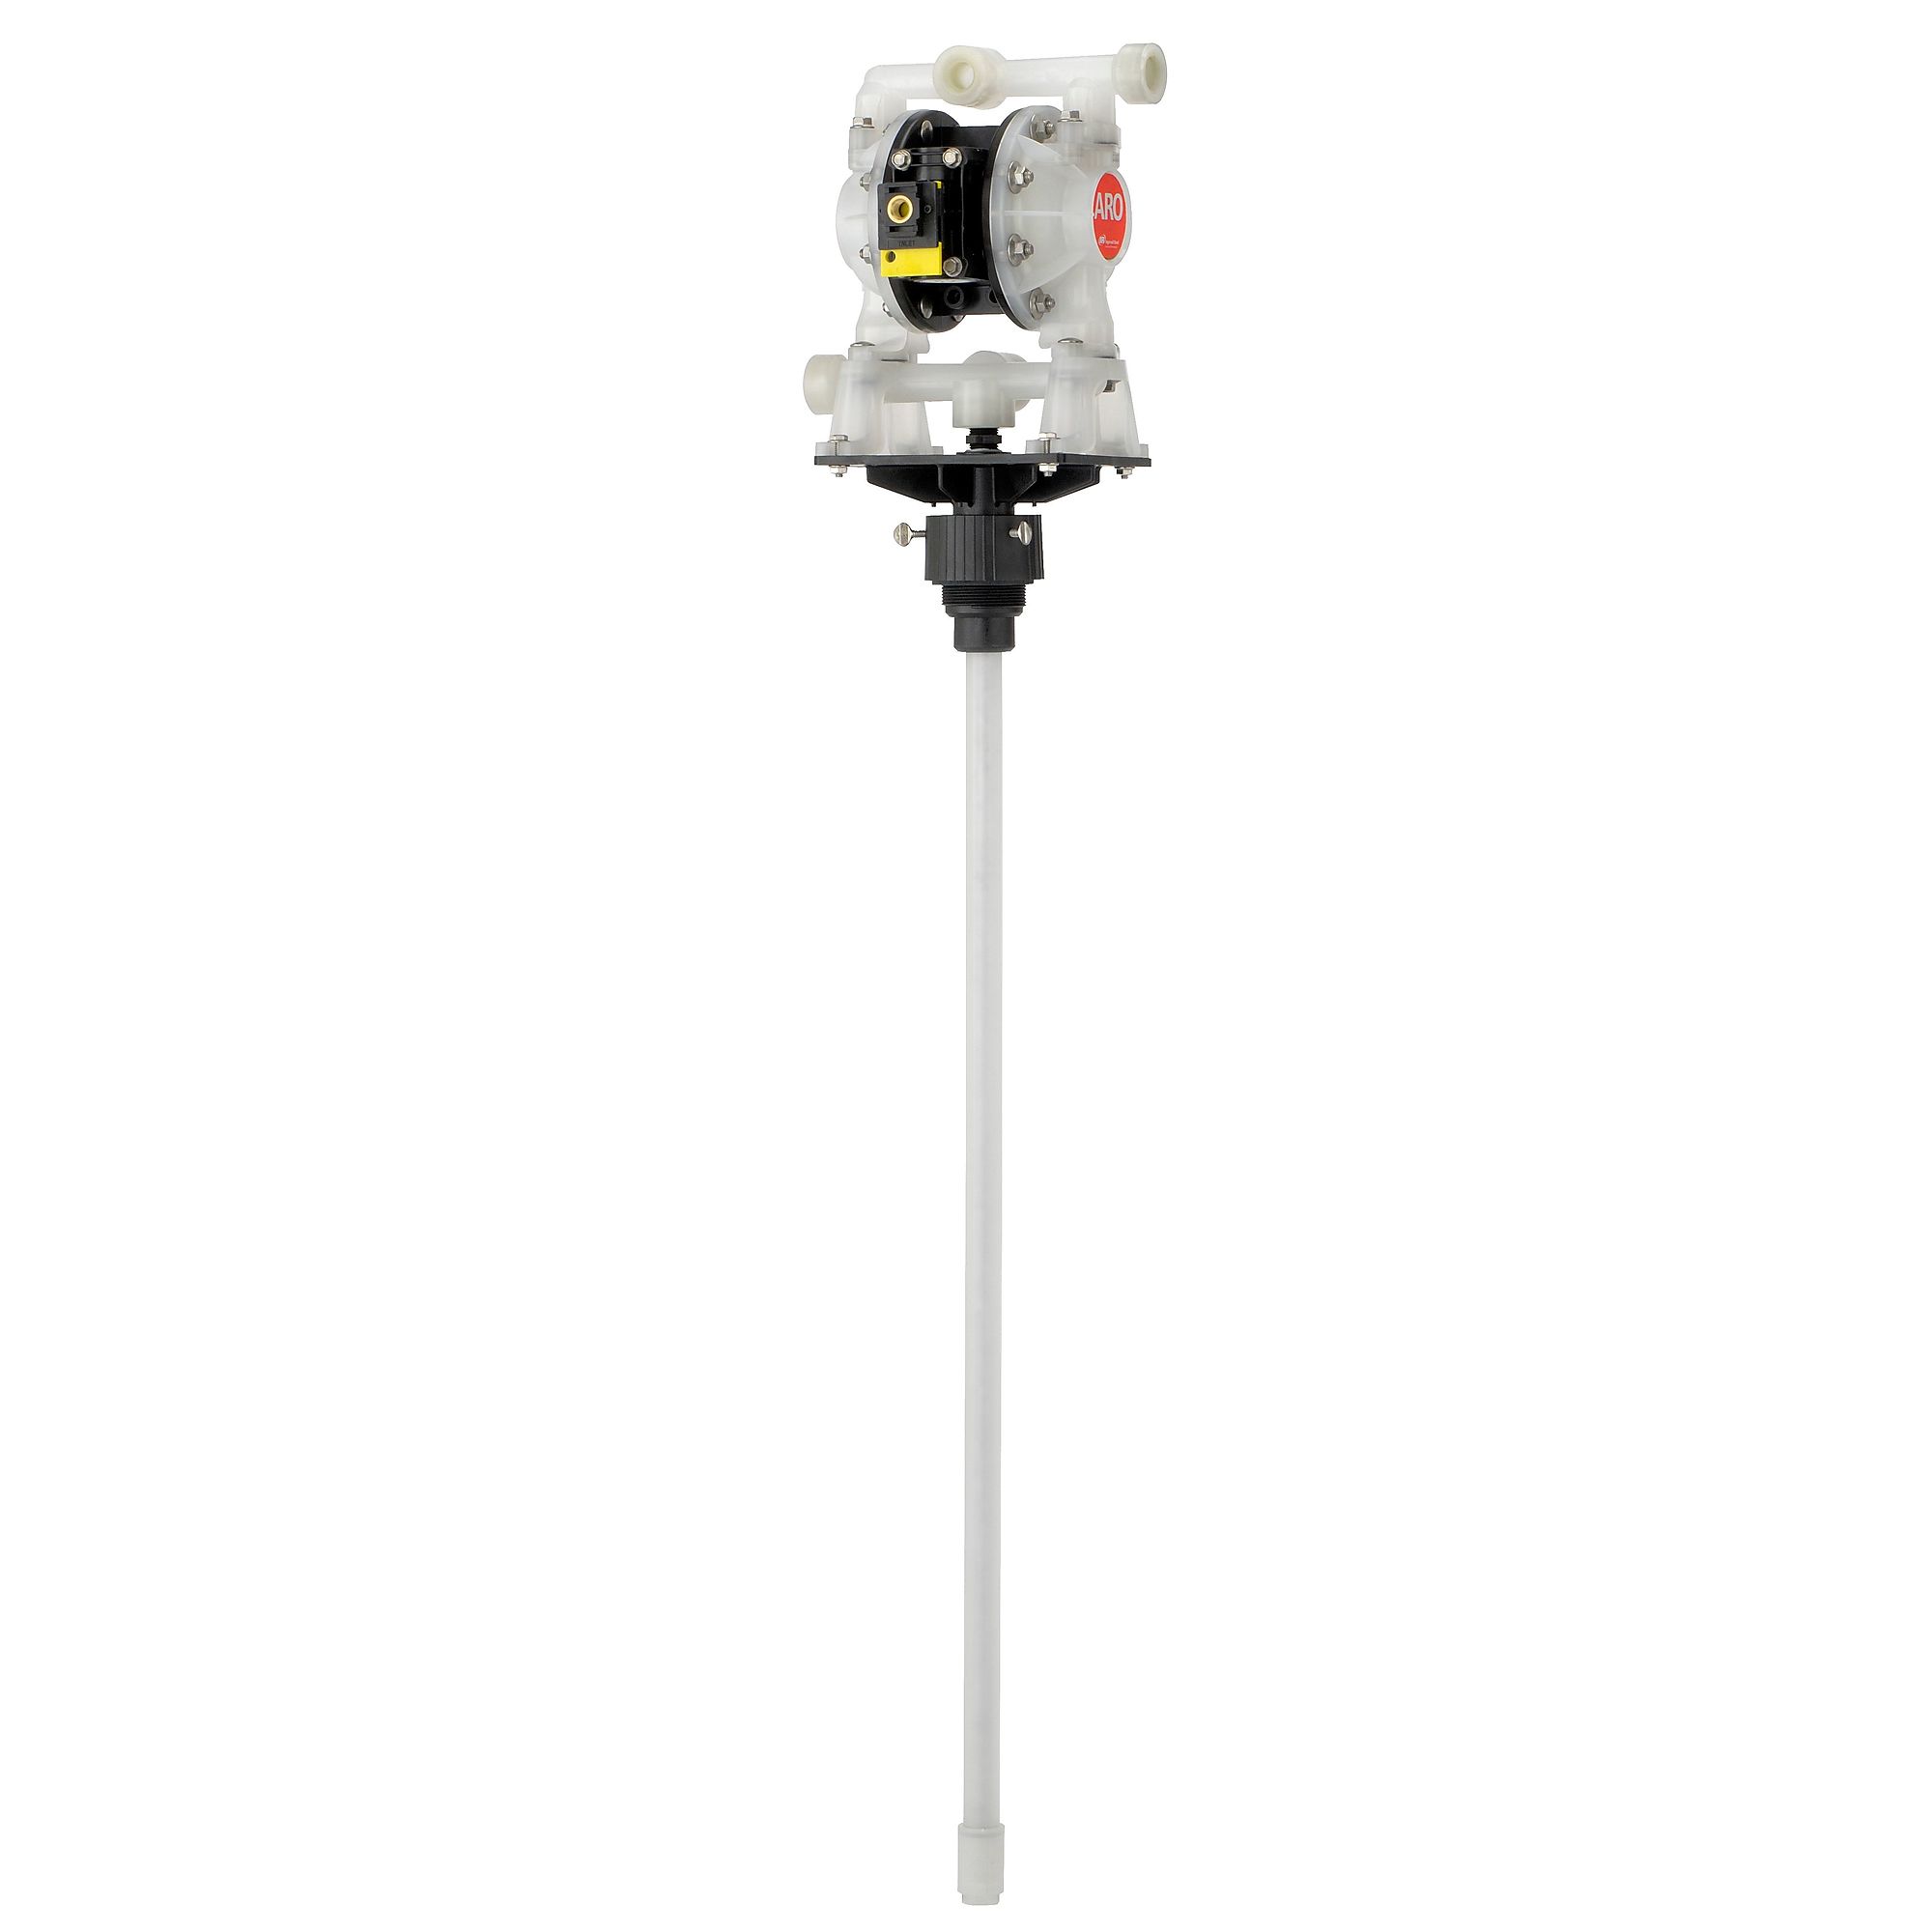 1/2Inch Air Operated drump pump, Flow 14.4 GPM, Inlet Port 1/2 in, Outlet Port 1/2 in, Model - ARO Ingersoll Rand DAB05-PPUU-2-F